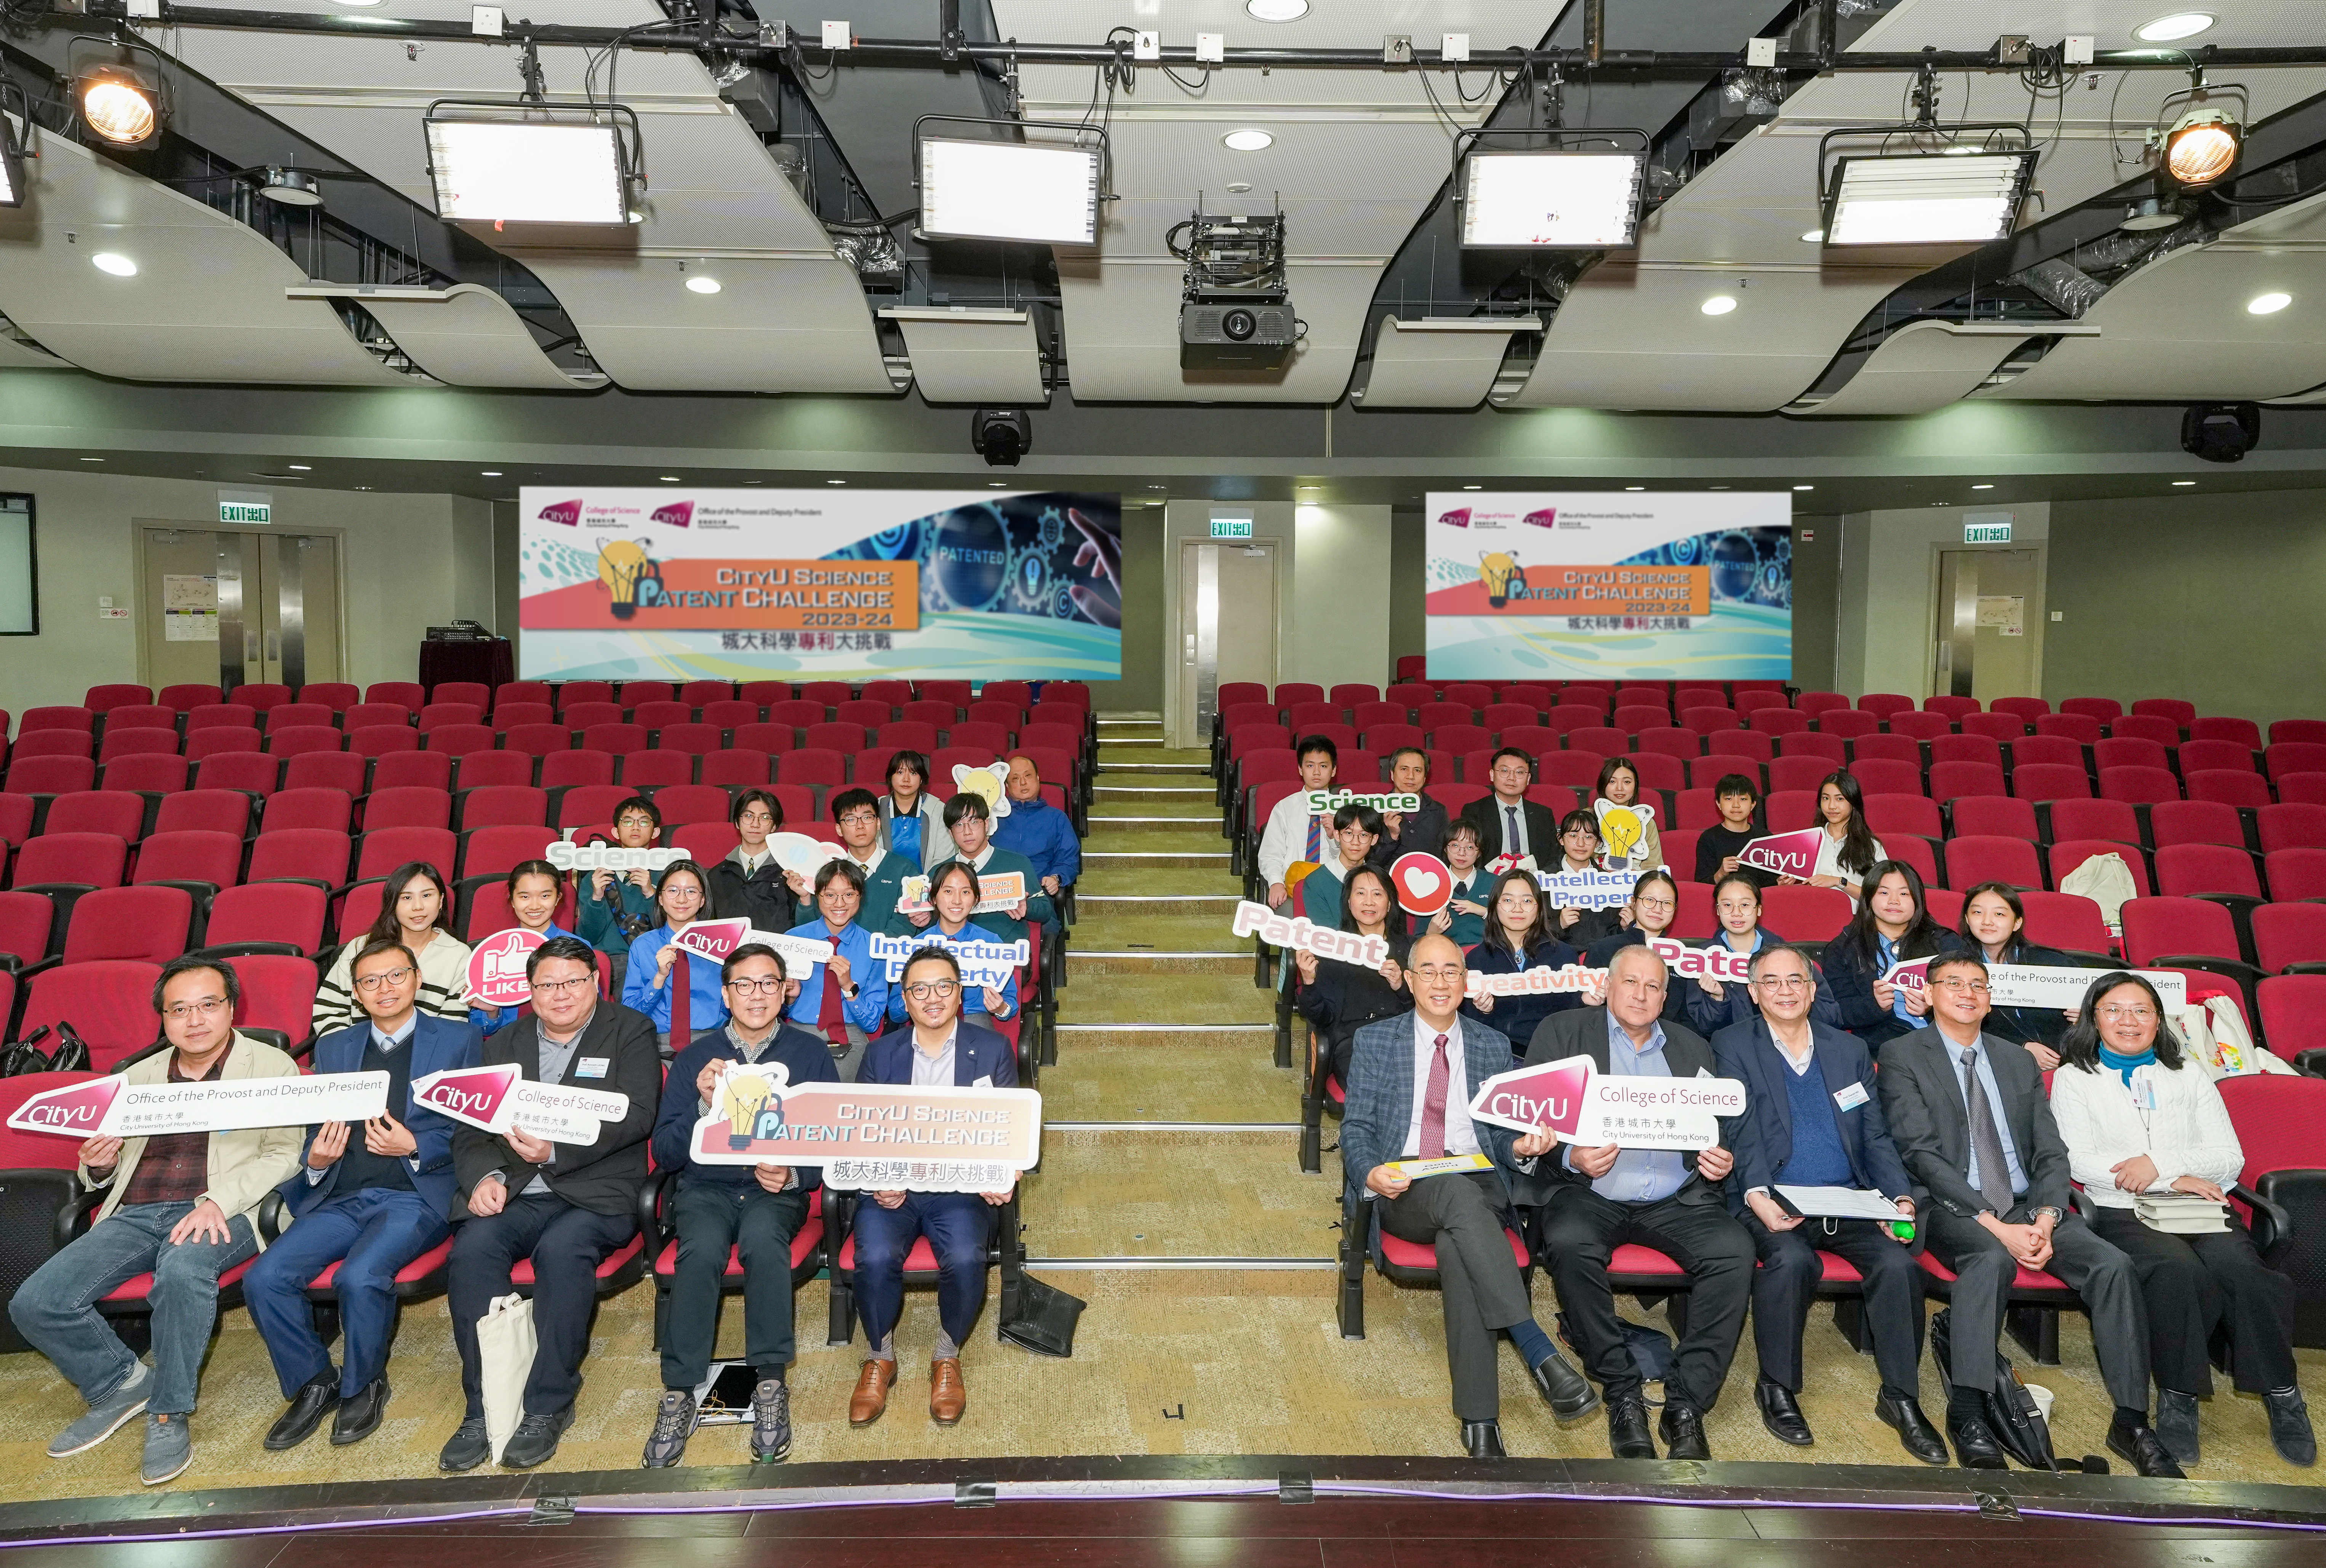 CityU Science Patent Challenge 2023/24 has come to the climax of the Final Pitch on 17 February, with Lung Kong World Federation School Limited Lau Wong Fat Secondary School crowned the Gold Award. 